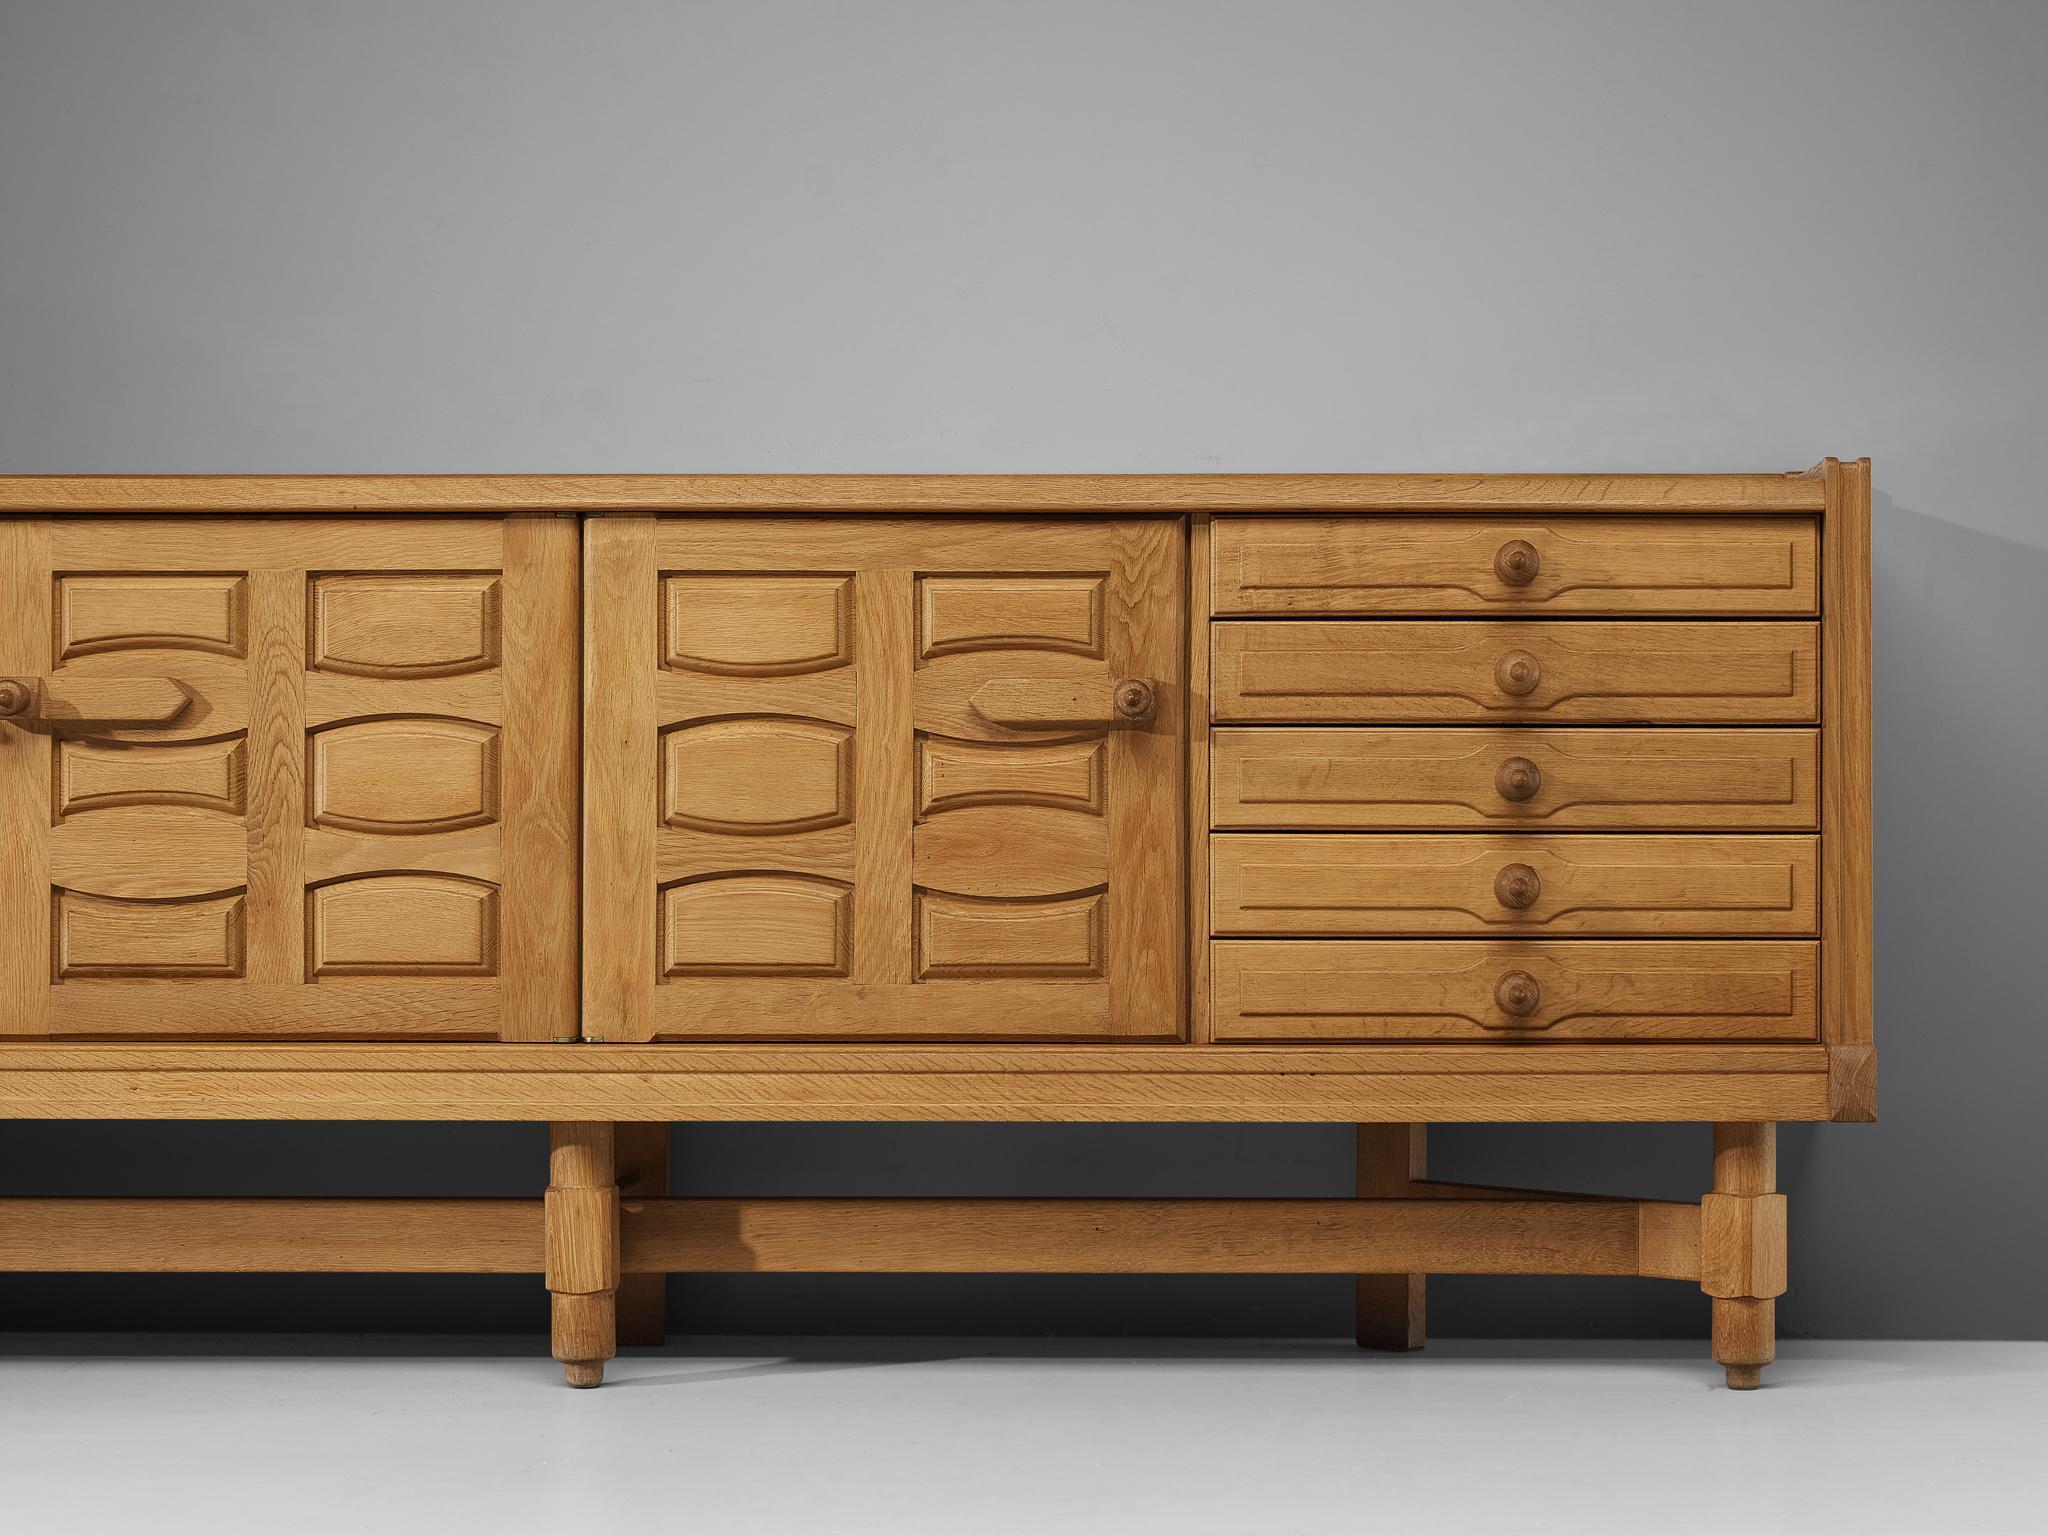 Guillerme & Chambron Sideboard in Solid Oak with Ceramic Tiles 4